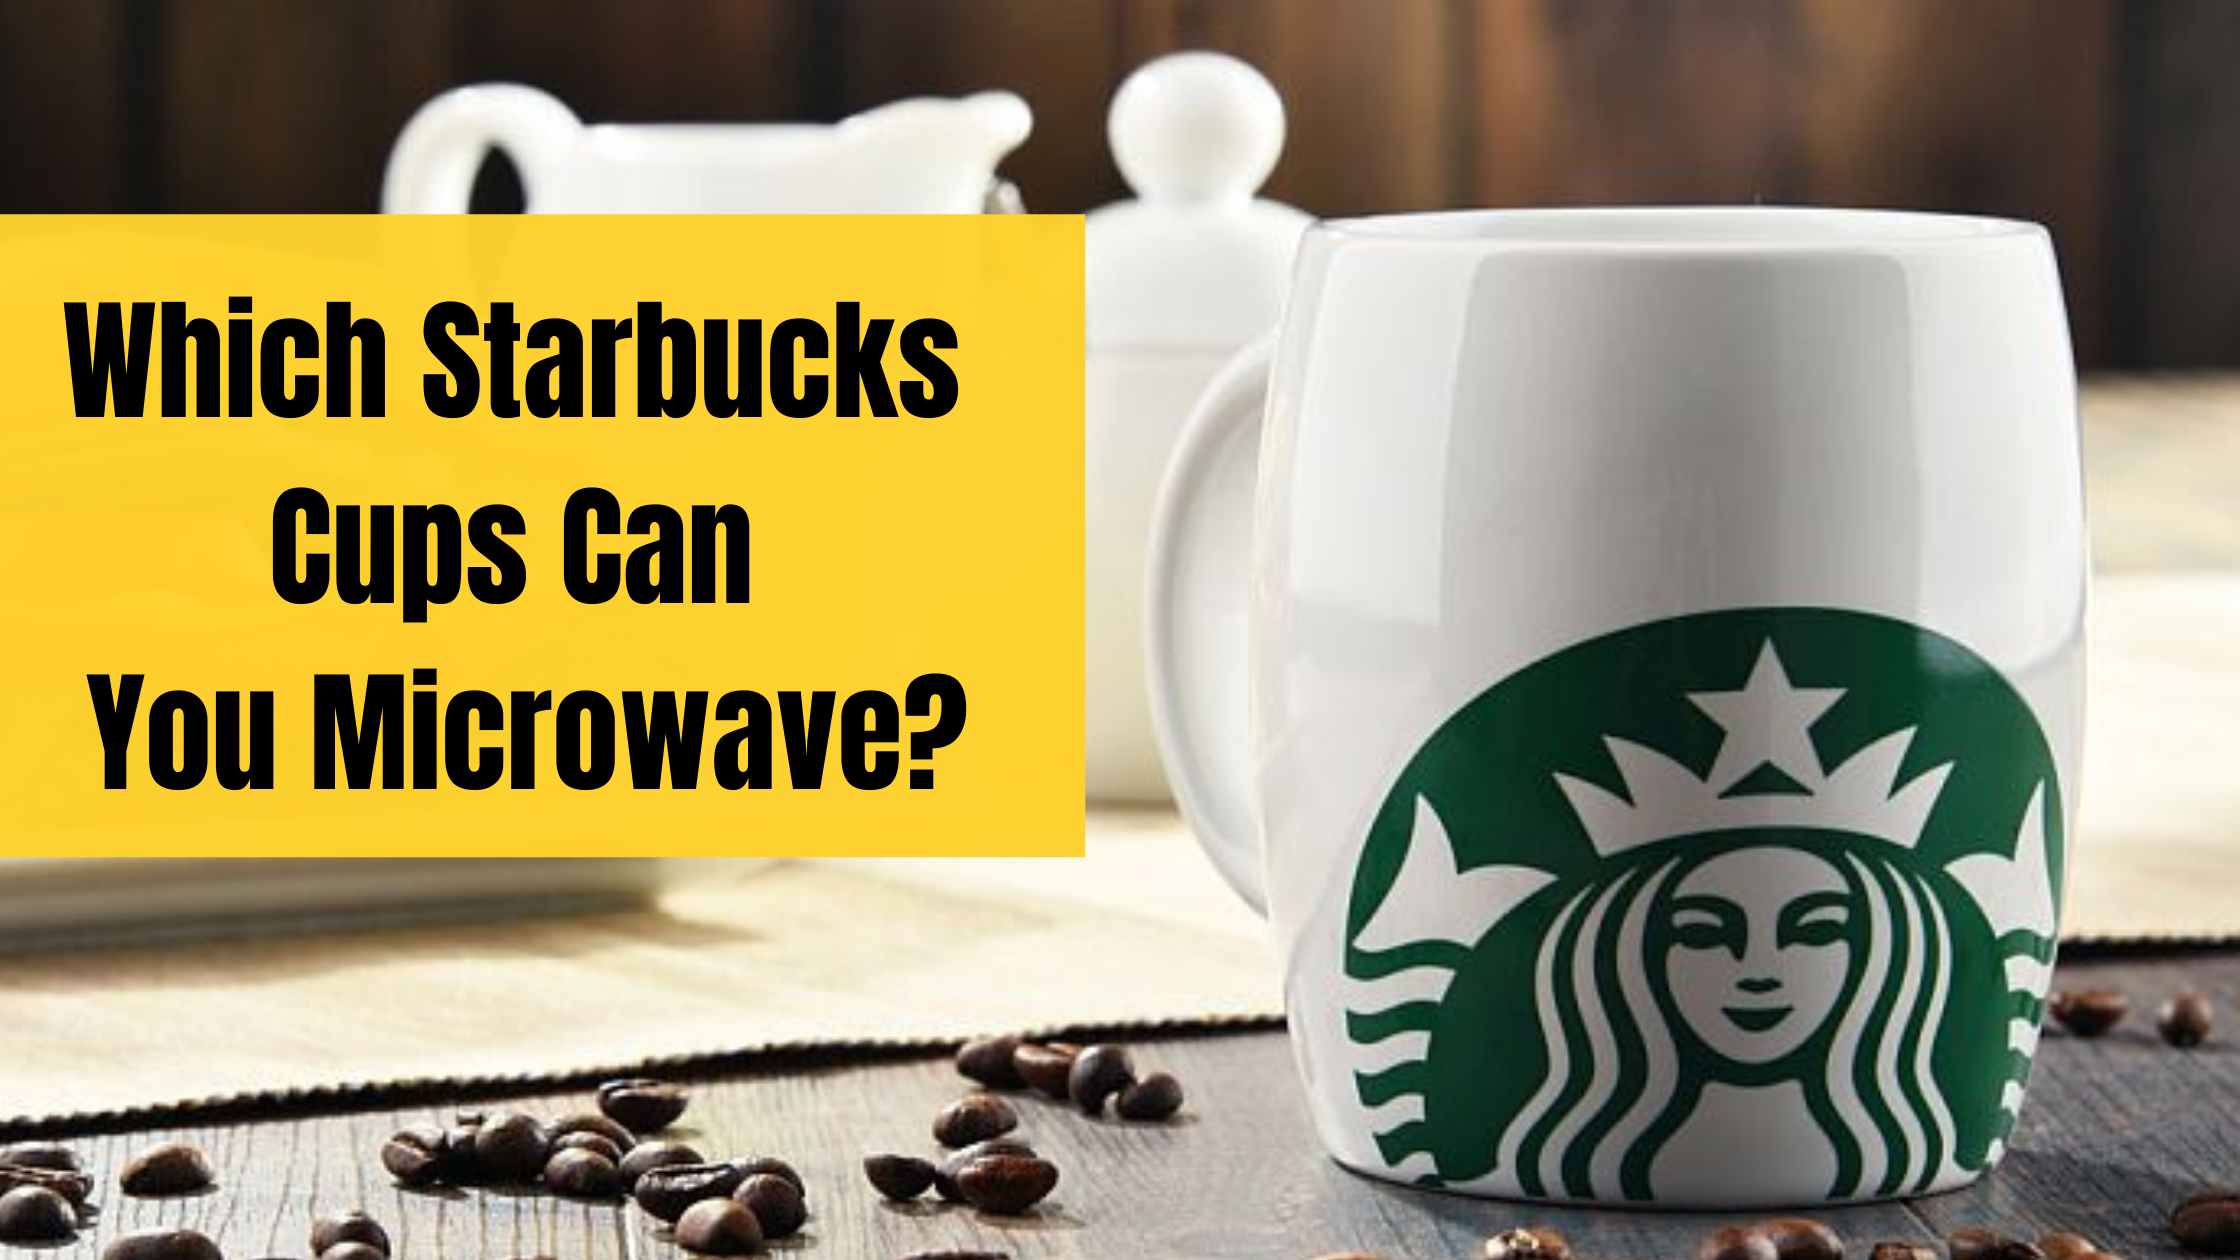 Which Starbucks Cups Can You Microwave?